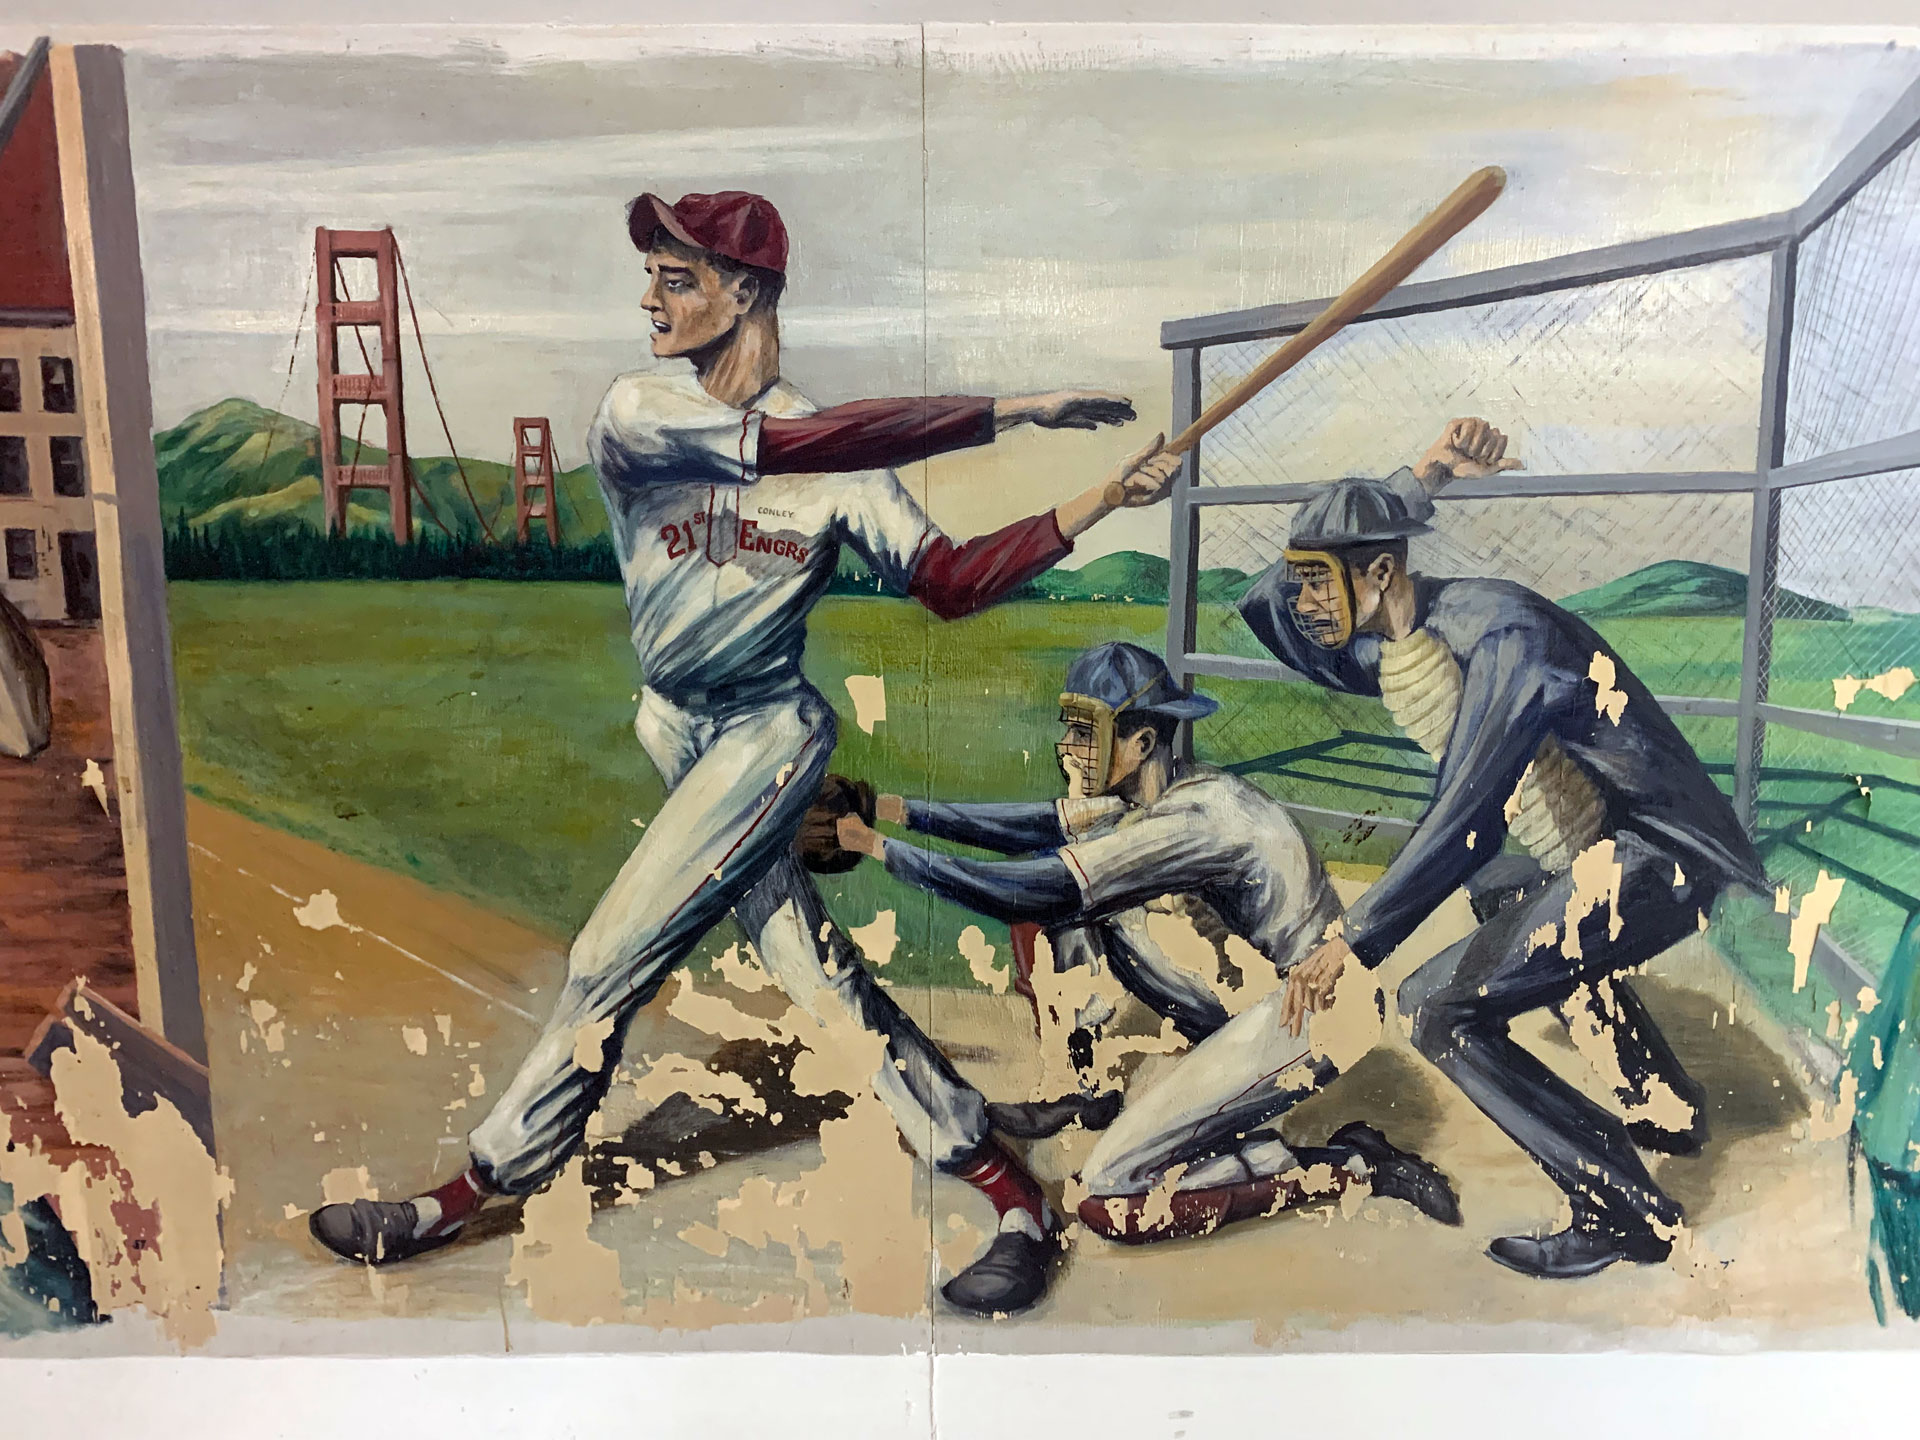 A slightly chipped mural depicting a batter, catcher and umpire at home plate. Behind them loom two towers of the Golden Gate Bridge.